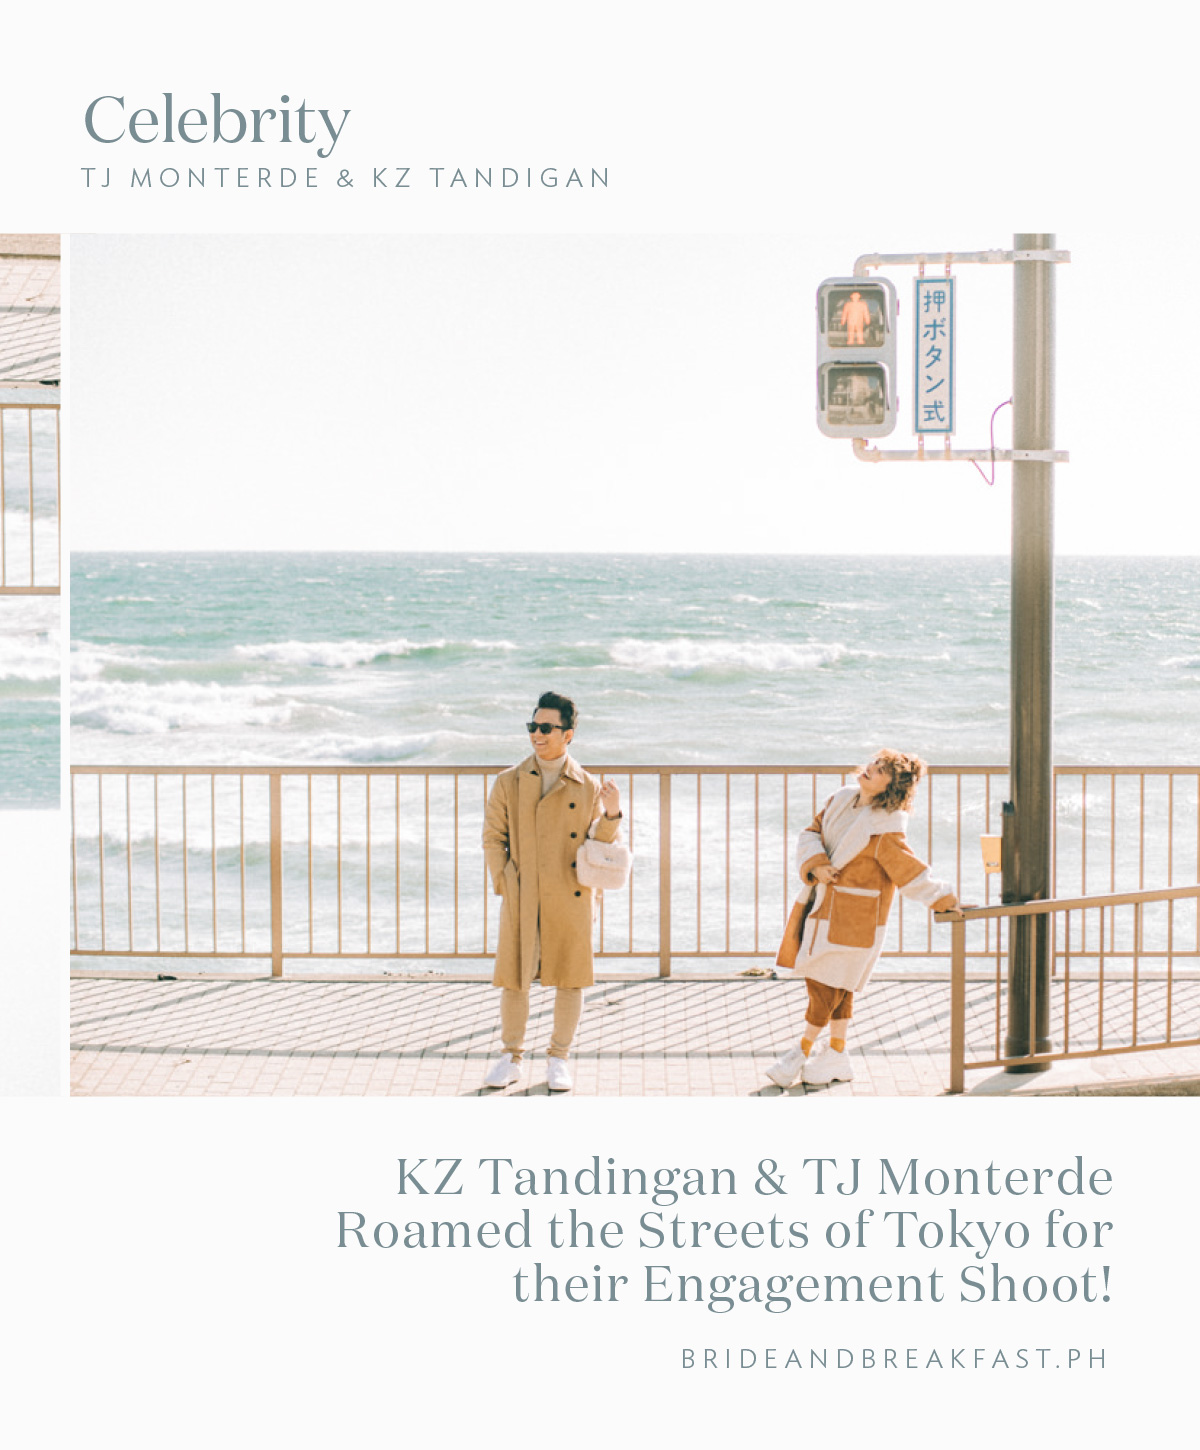 KZ Tandingan and TJ Monterde Roamed the Streets of Tokyo for their Engagement Shoot!